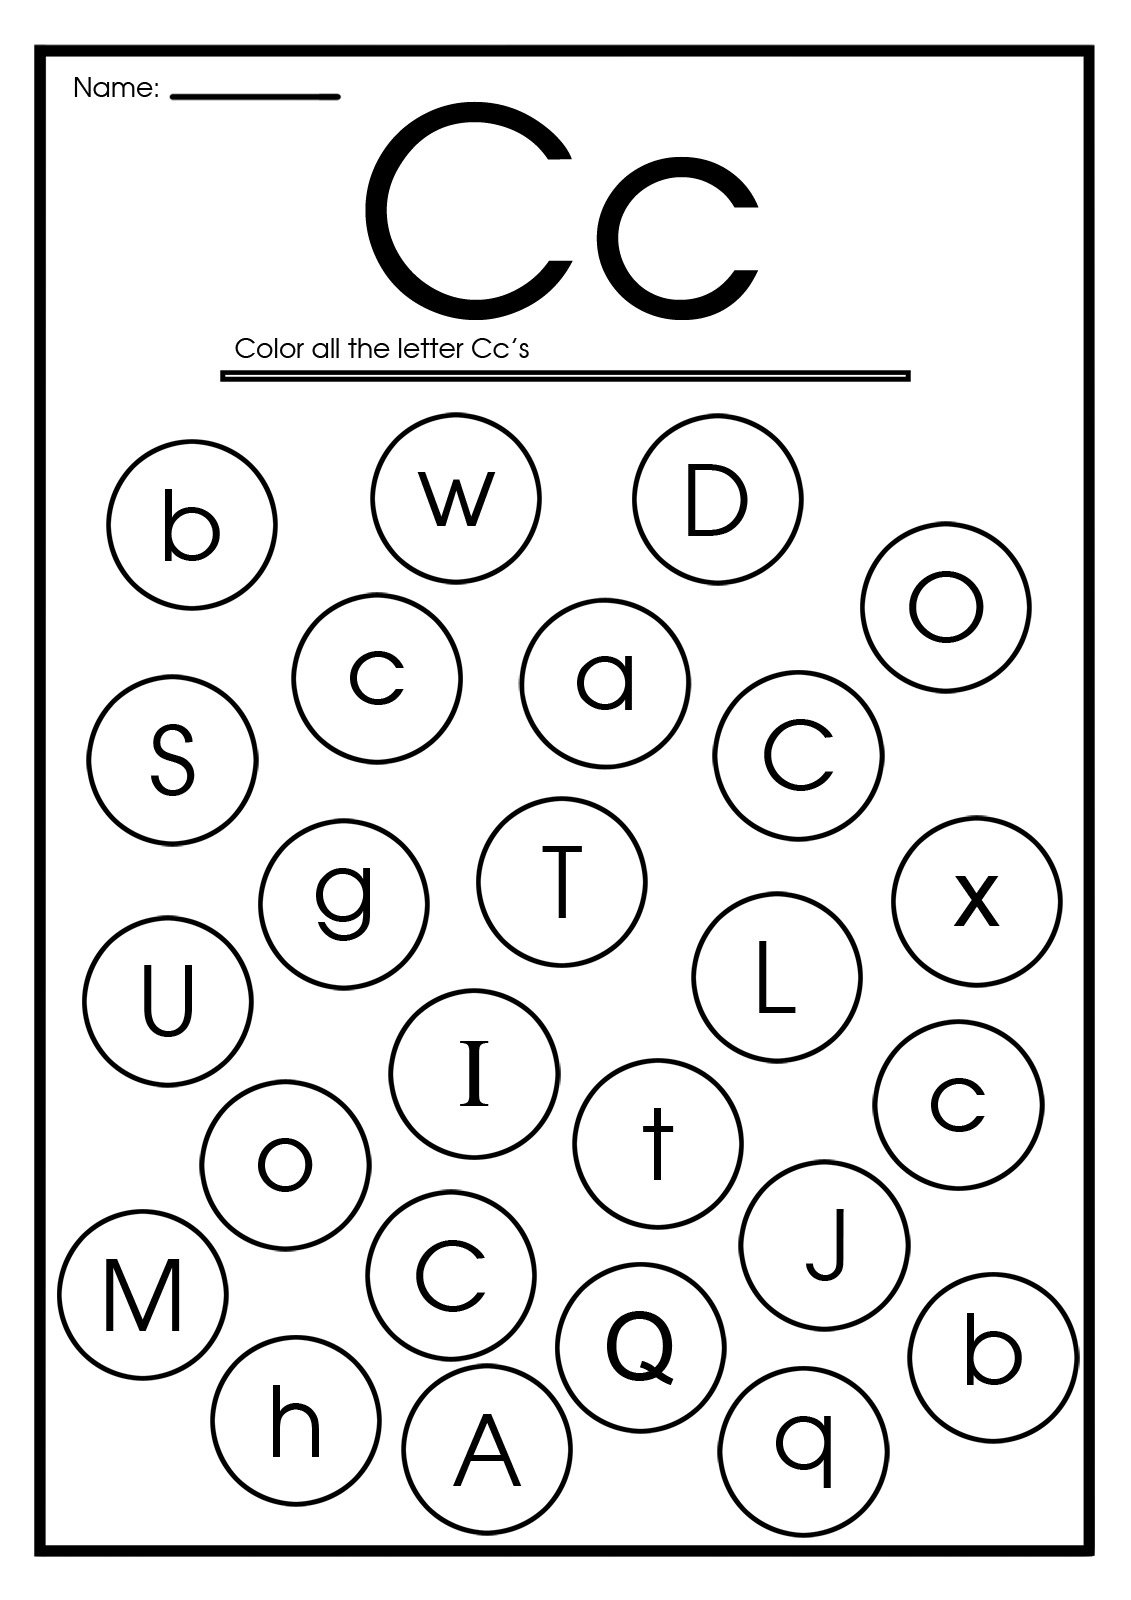 English for kids step by step letter c worksheets flash cards coloring pages